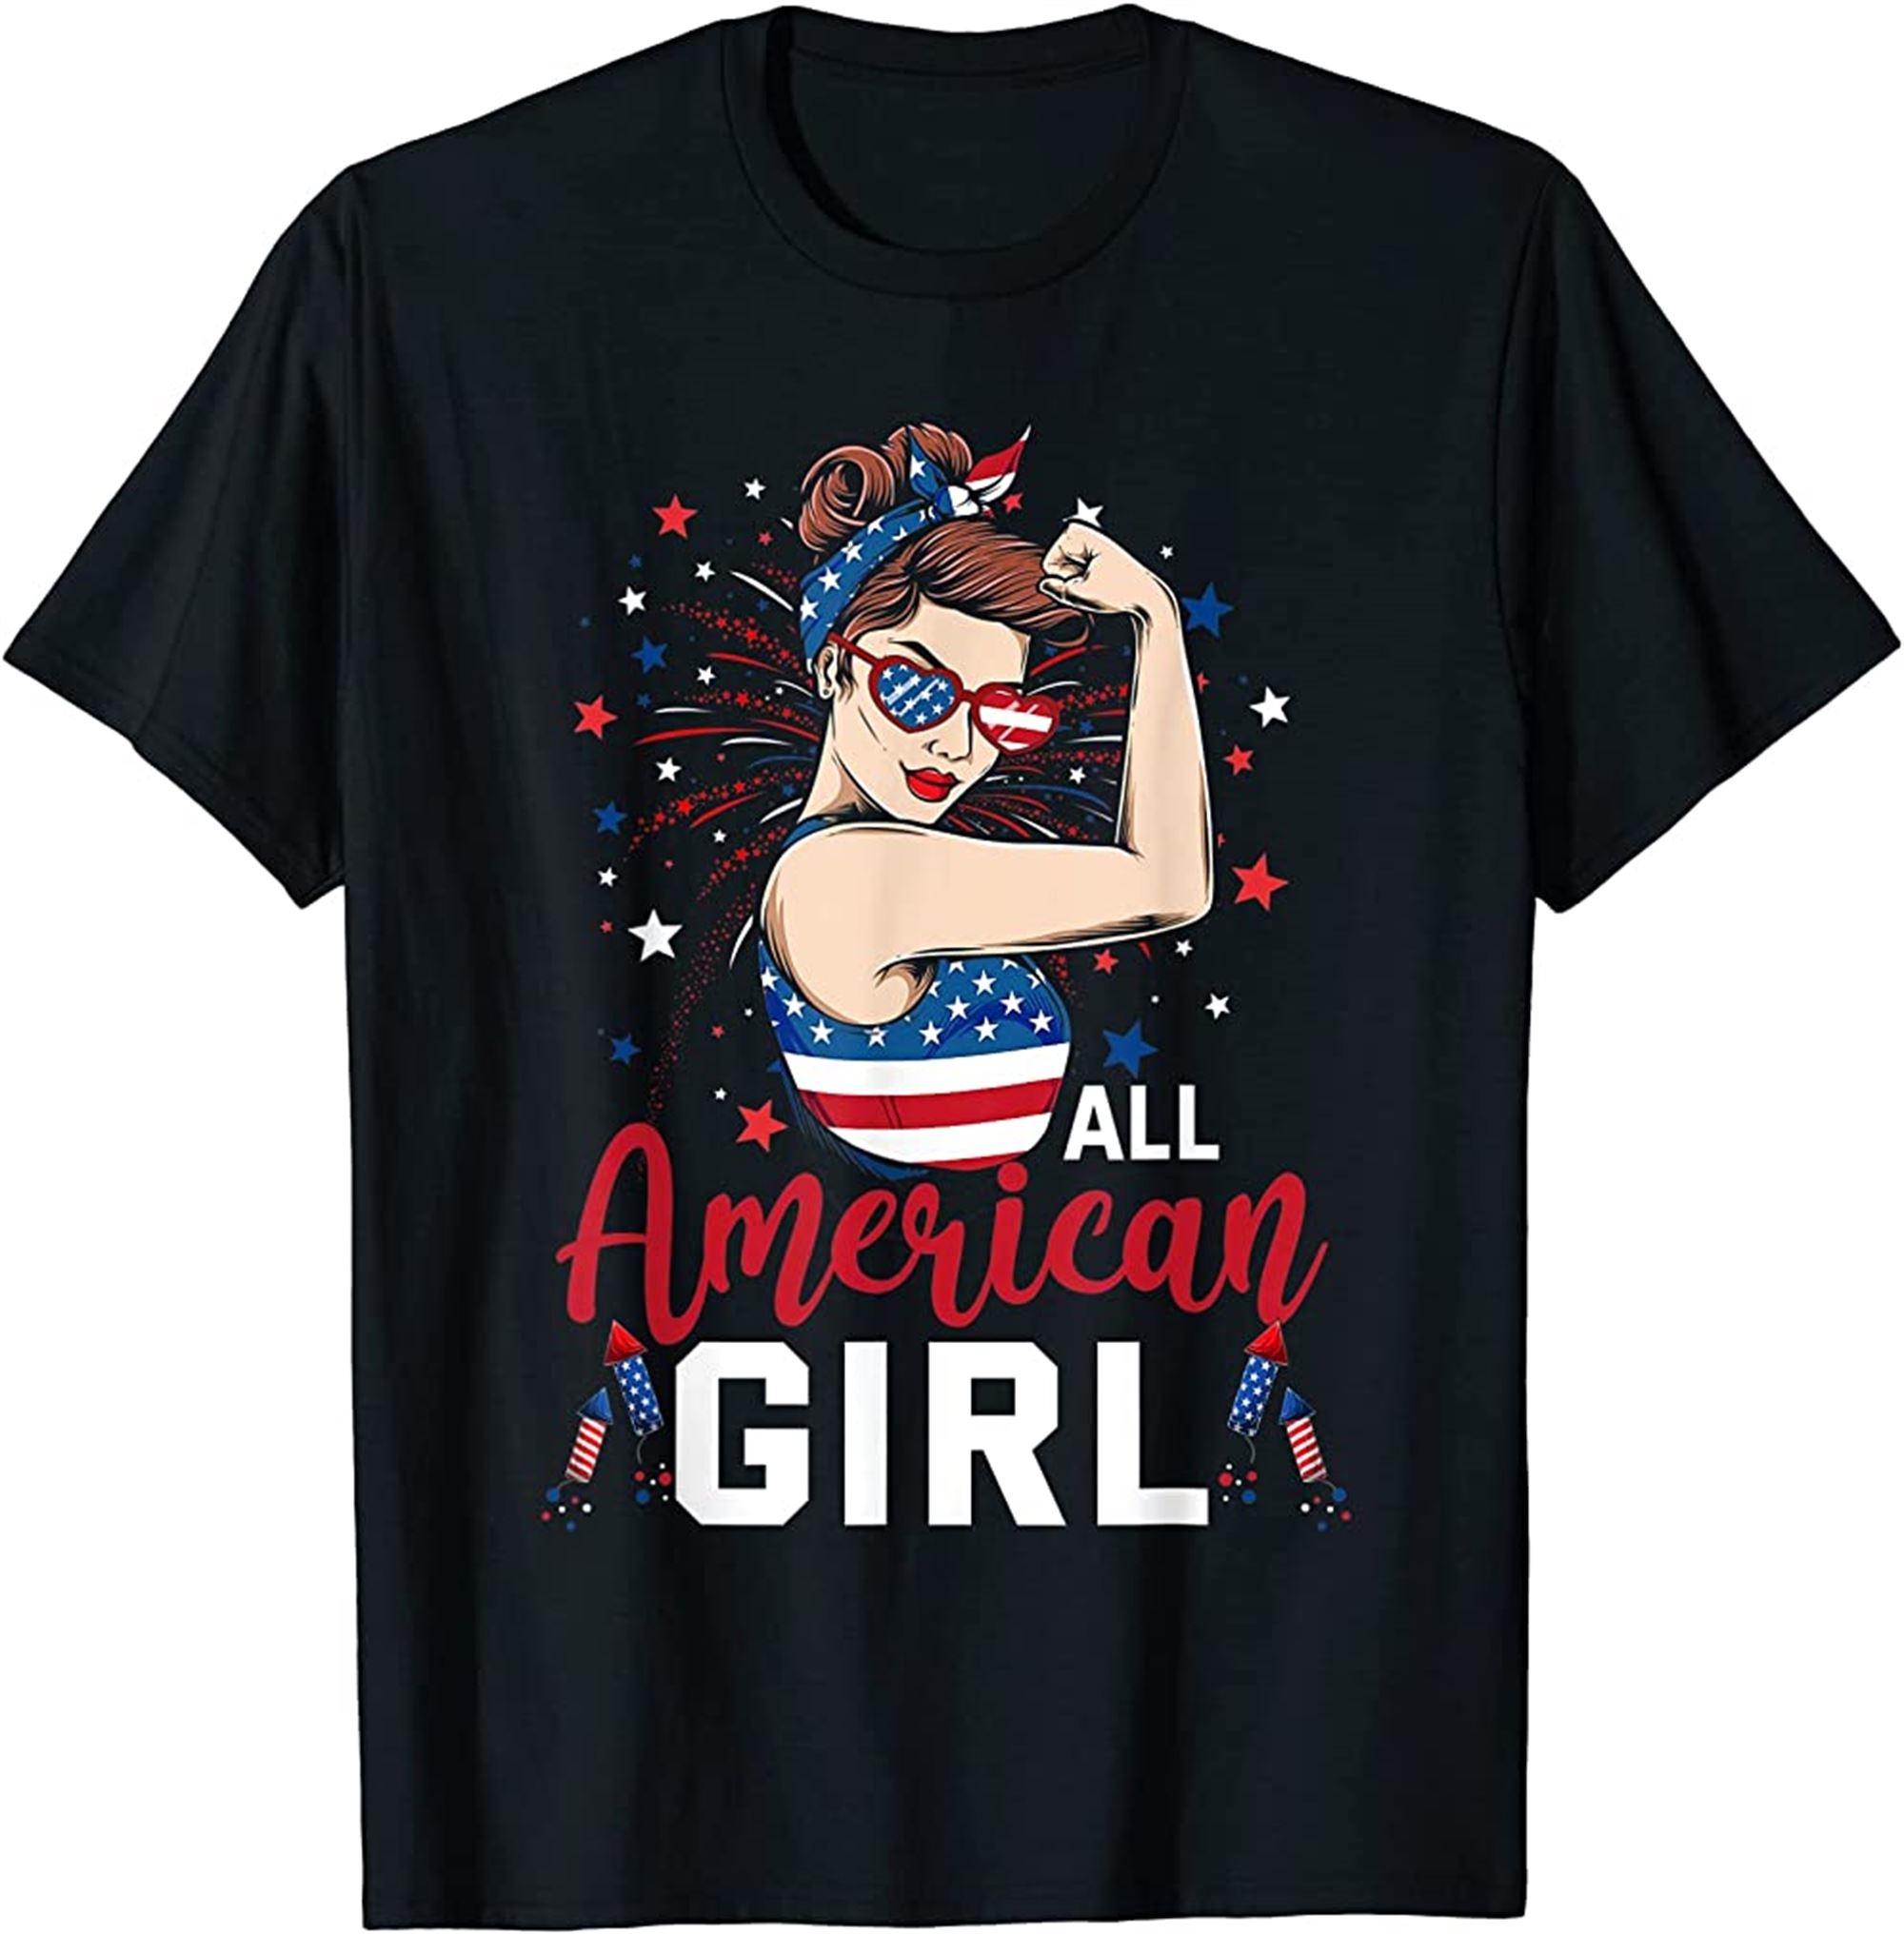 All American Girl Women American Flag 4th Of July Patriotic T-shirt Full Size Up To 5xl